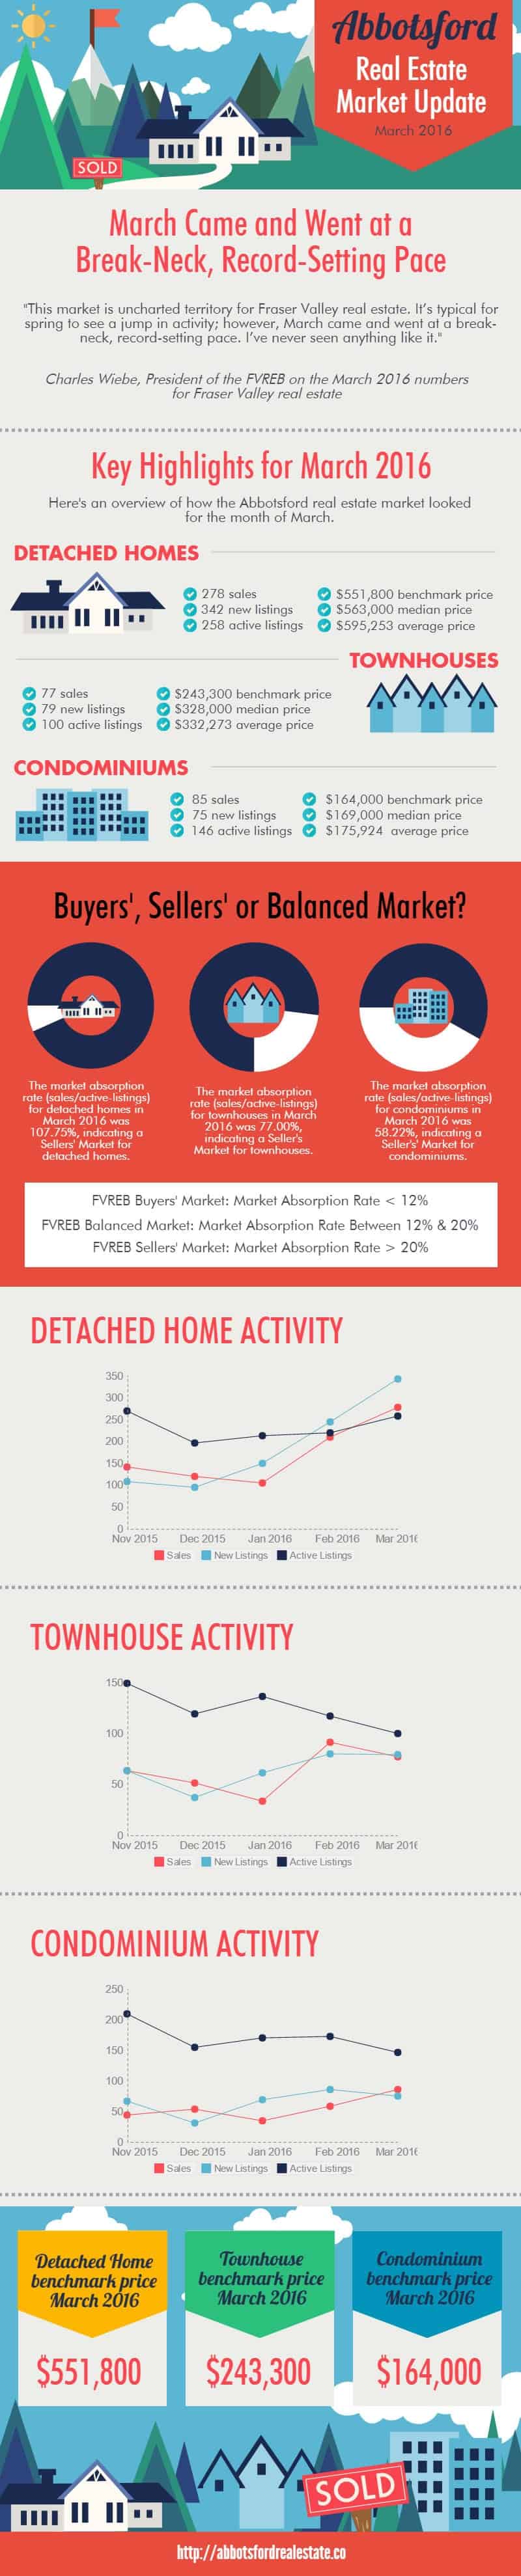 Abbotsford Townhouse Market Update March 2016 Infographic